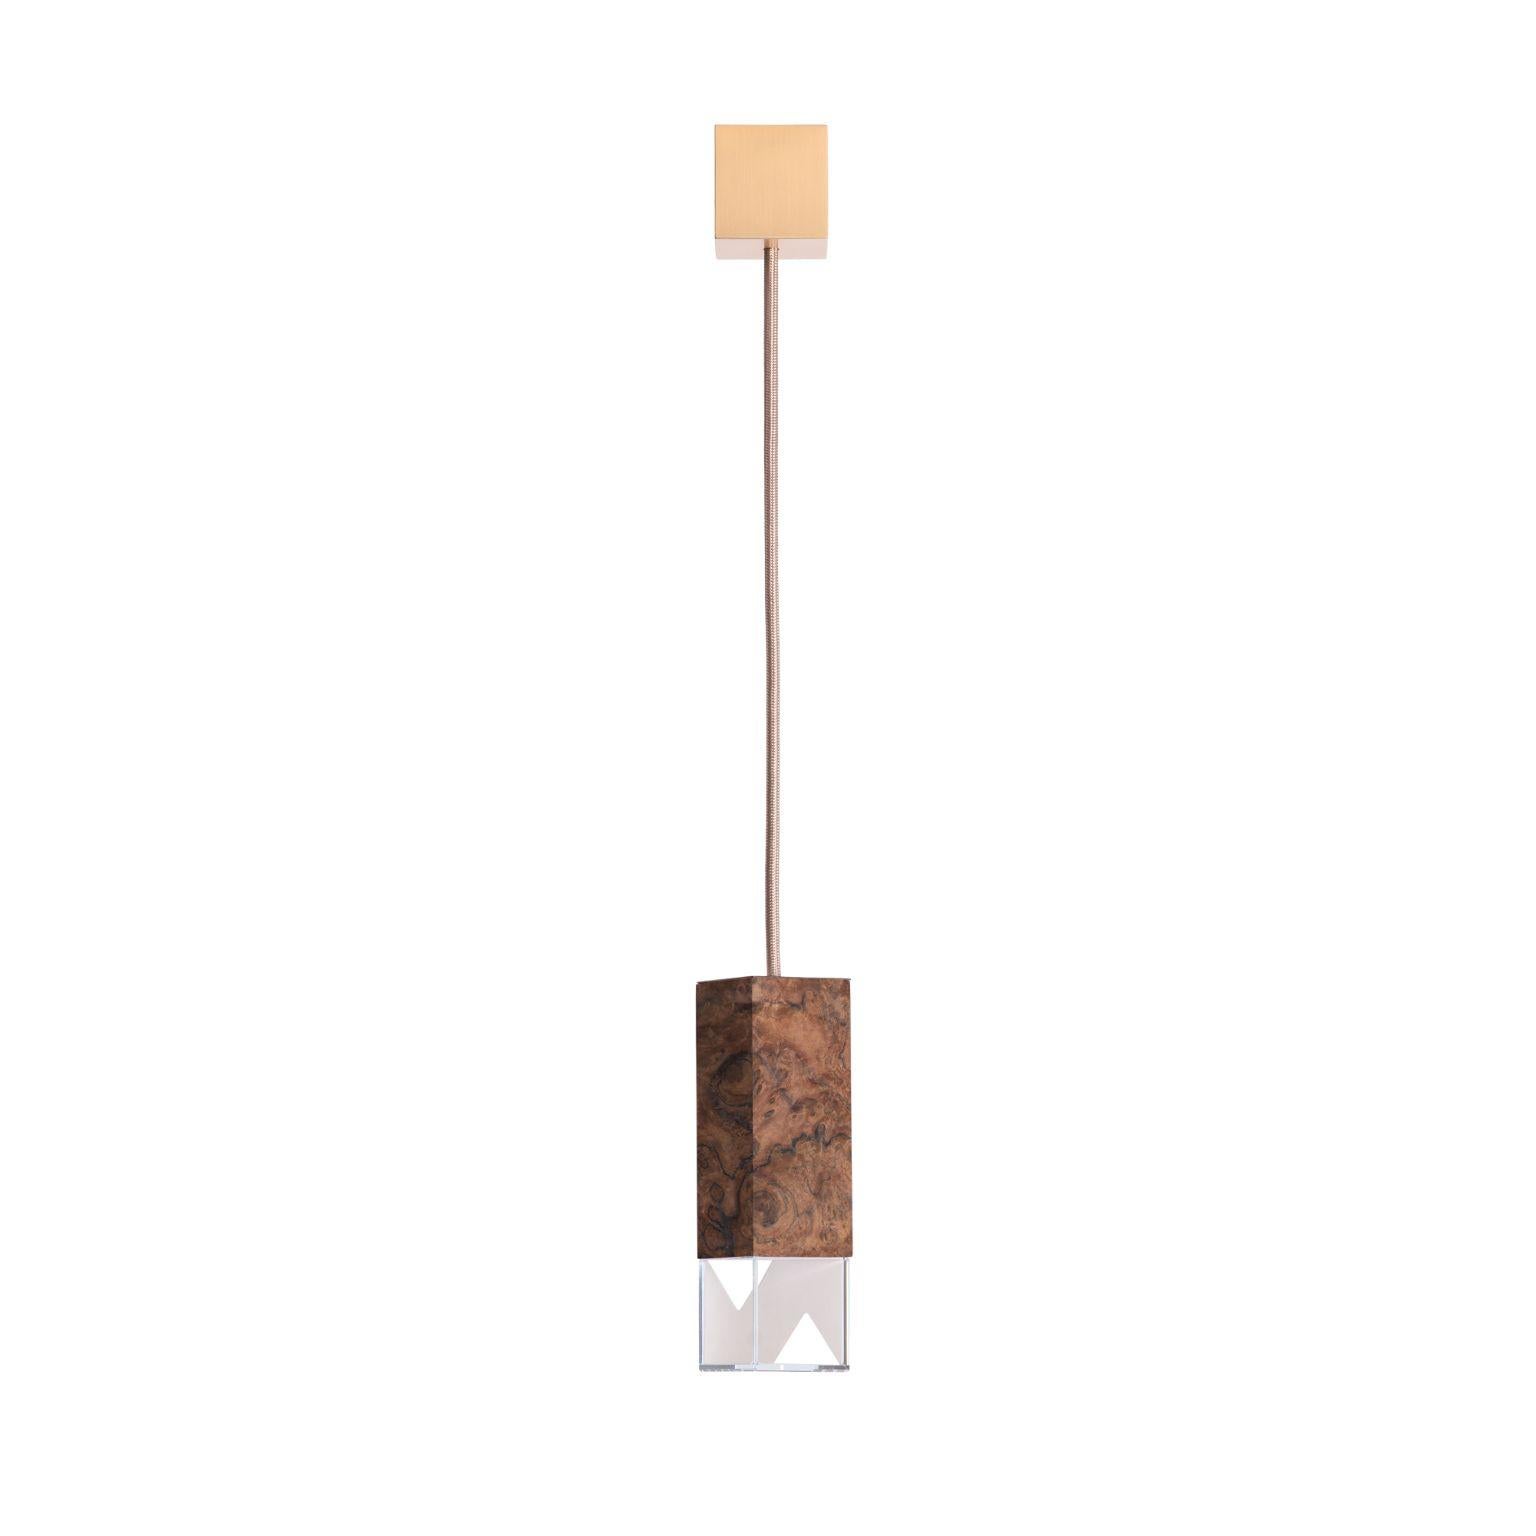 Lamp one wood 02 by Formaminima
Dimensions: D 5 x W 5 x H 17 cm.
Materials: body lamp: walnut briarwood, crystal glass diffuser, Limoges porcelain sheets, biscuit-finish. Ceiling rose: solid brass, satin finish.

All our lamps can be wired